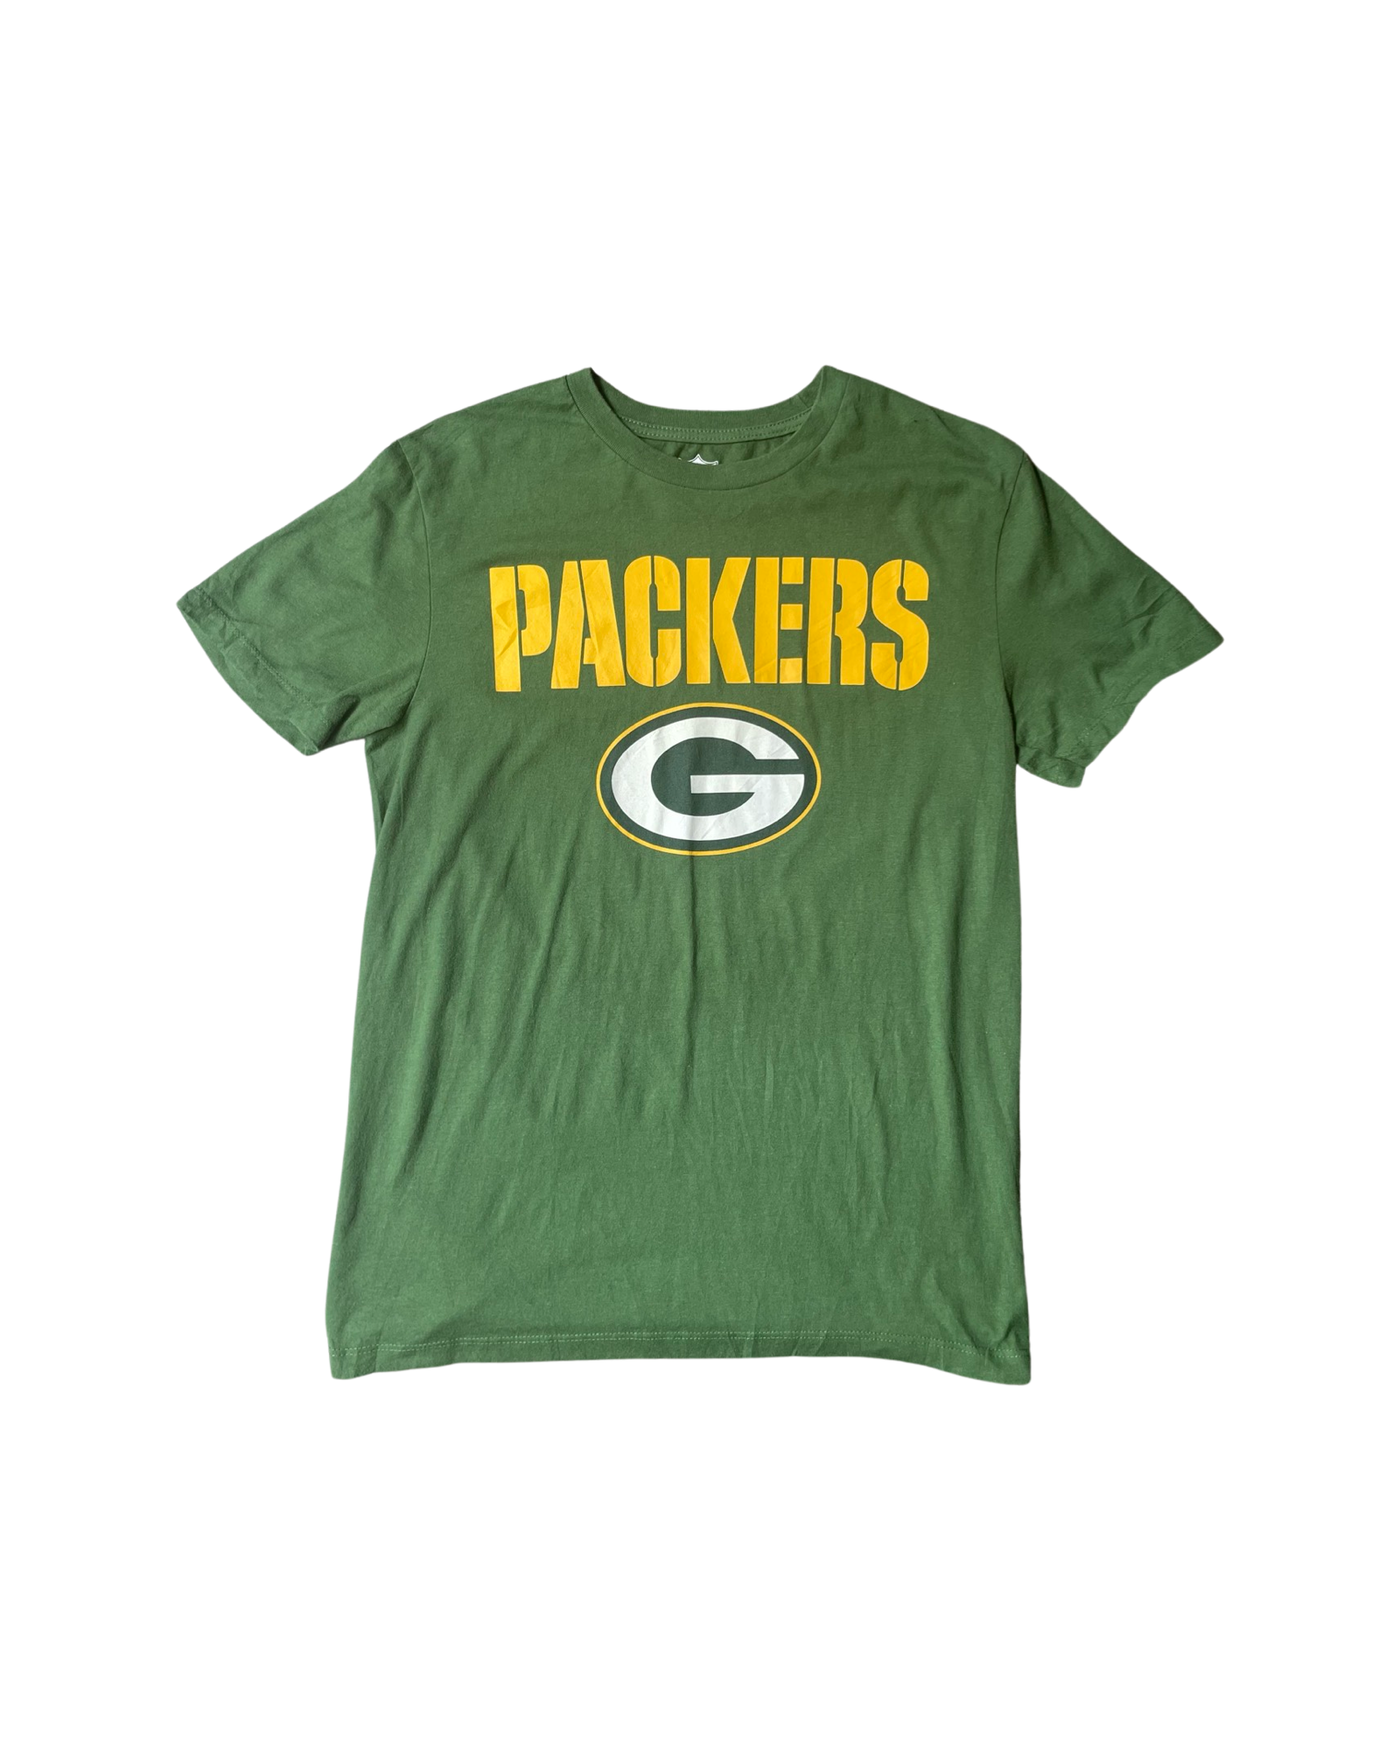 Vintage NFL Packers T-Shirt